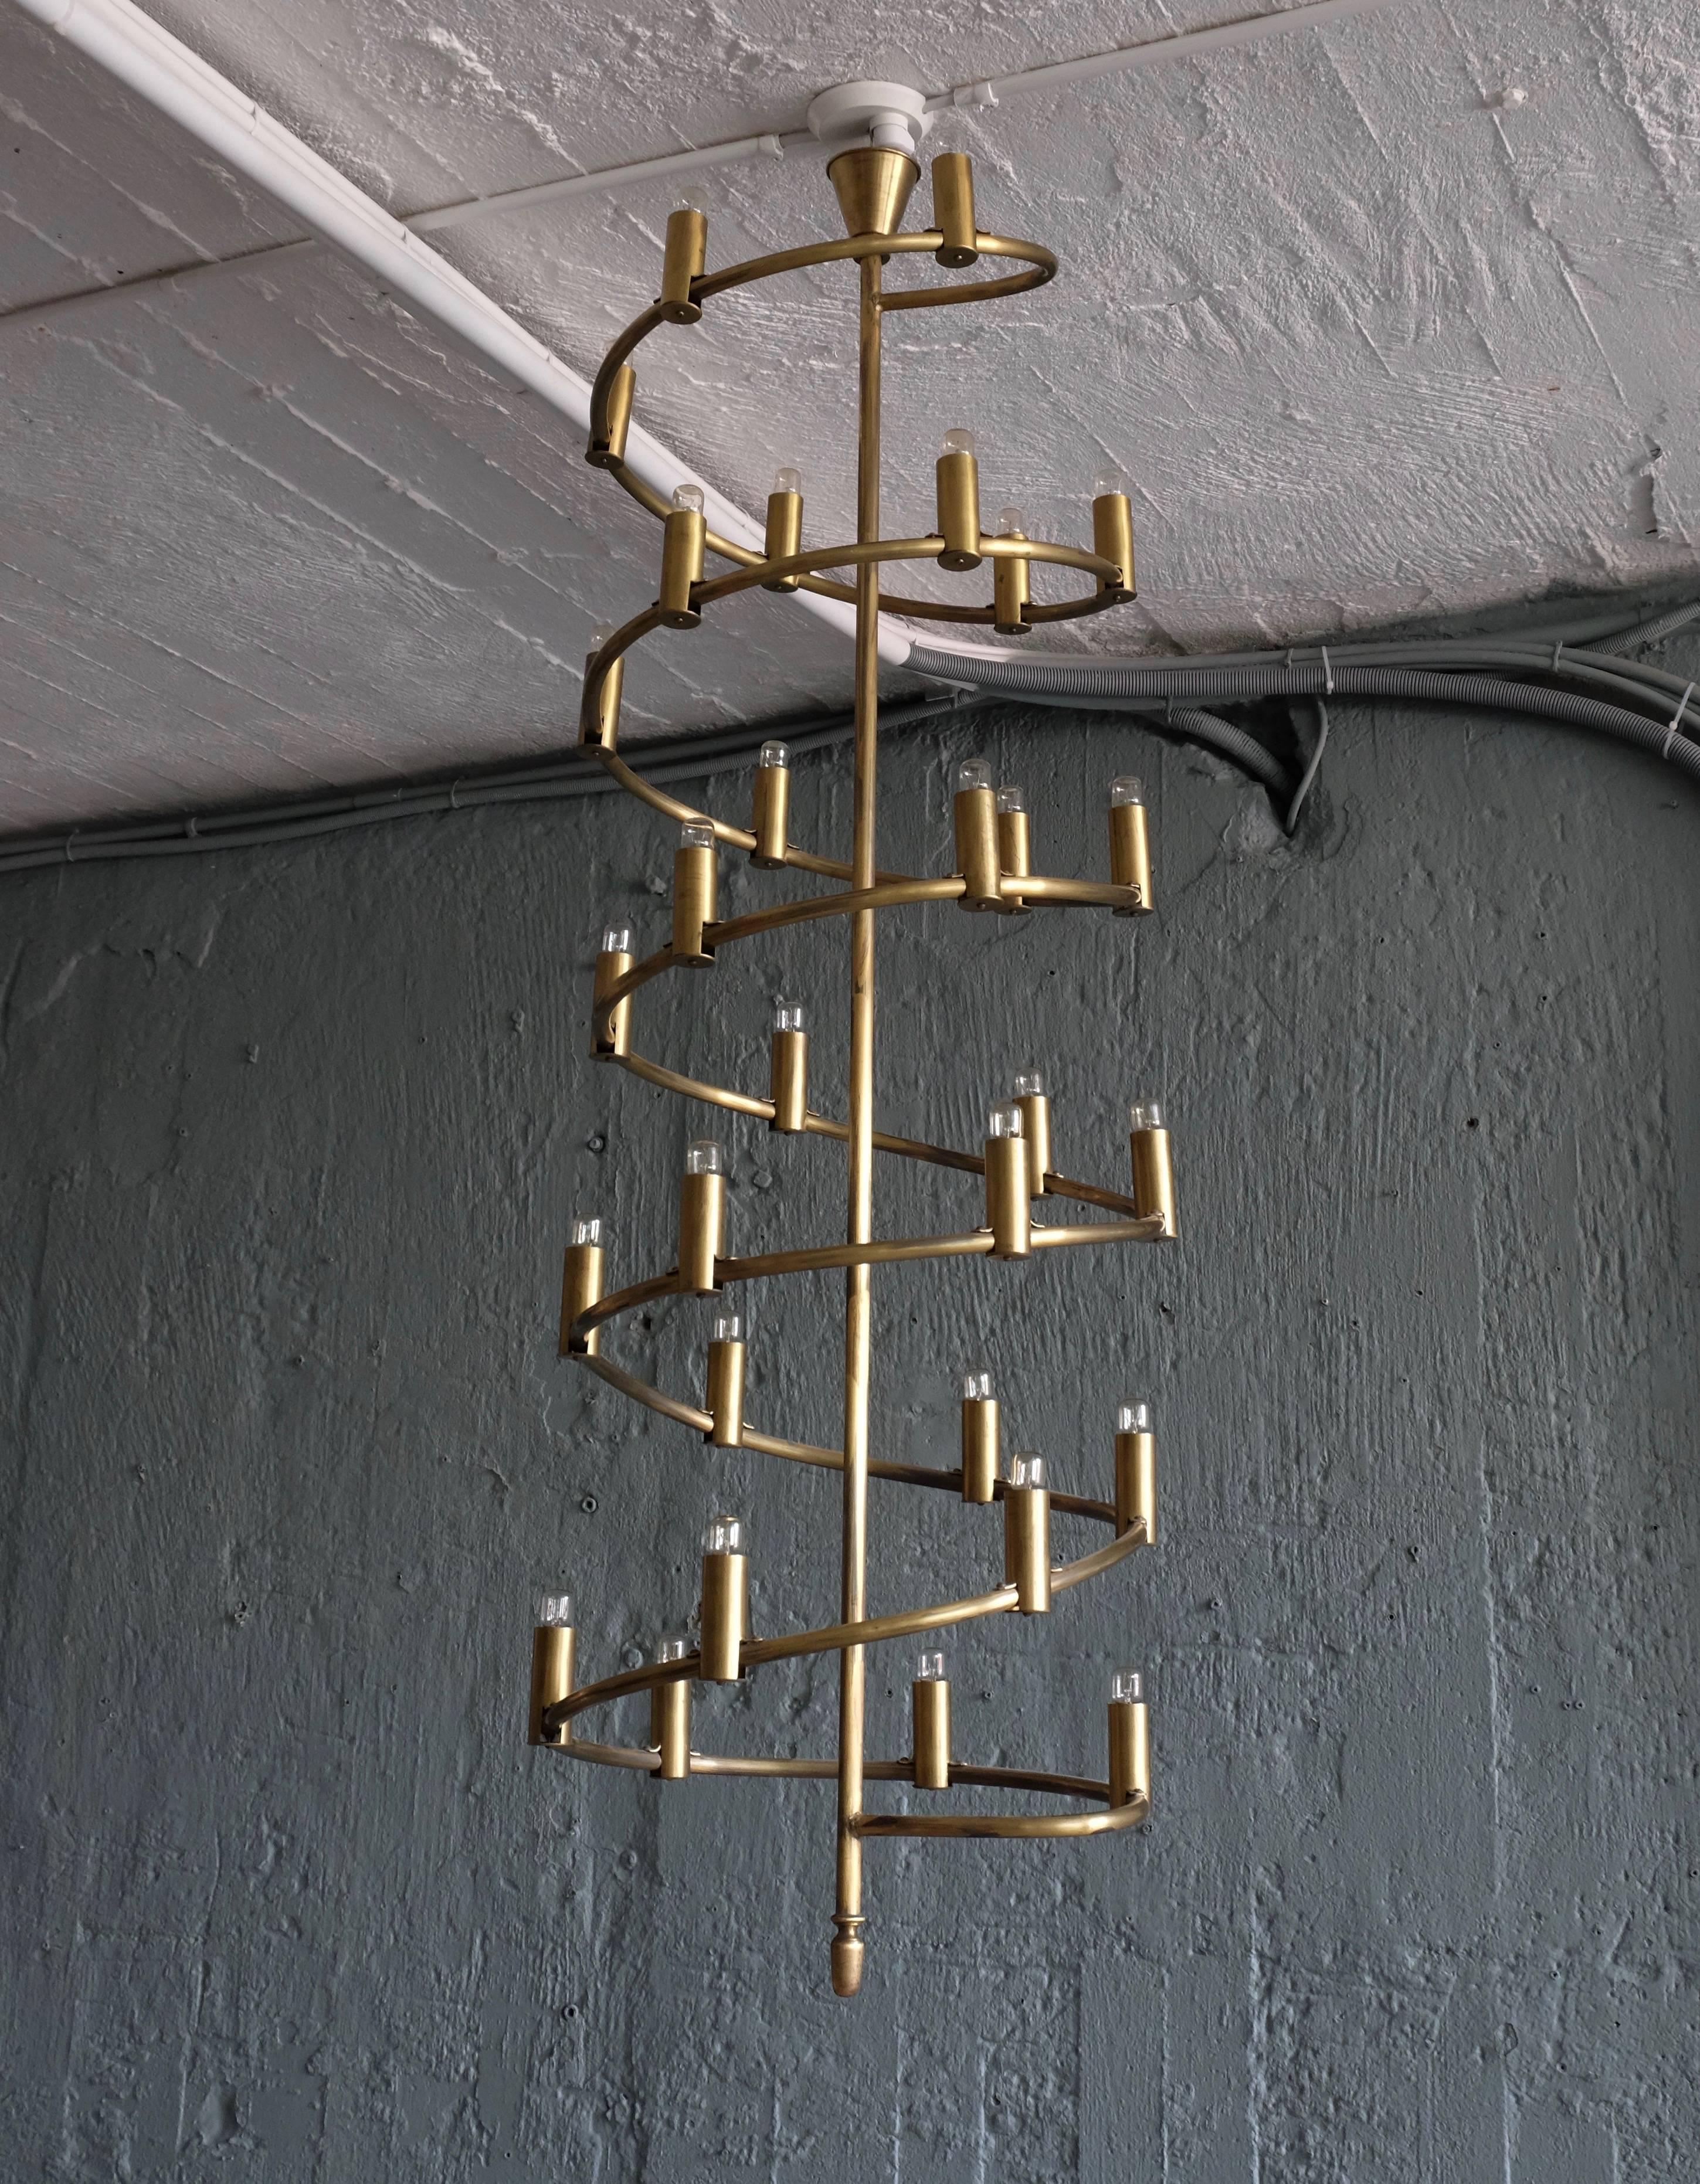 Unique chandeliers, special made for a villa in Sweden 1965. Set of 2 available.
Solid brass. Original extensions included. Very high quality, producer and designer unknown.
Height: 150 cm (extension 150 cm), total with extentions: 300 cm. 
Please